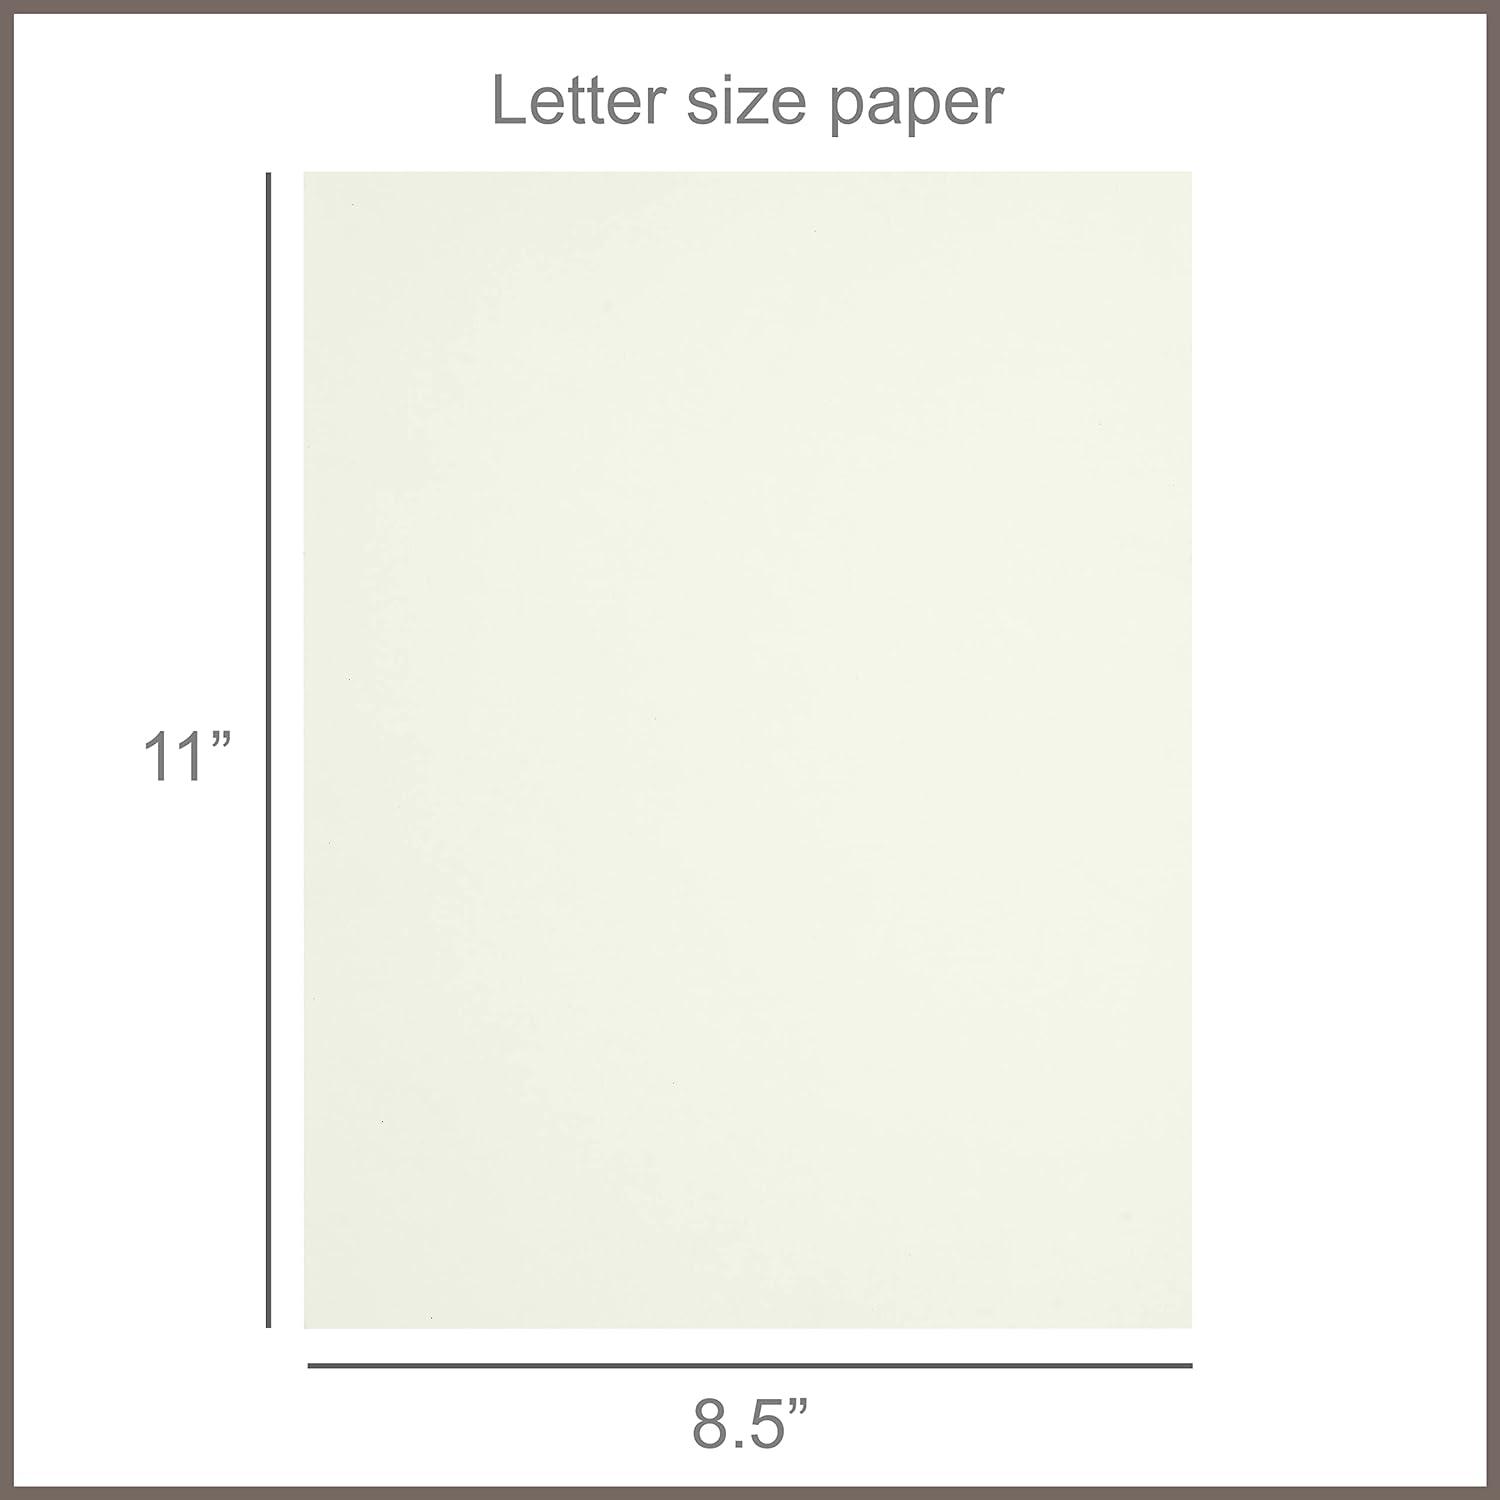 40 Sheet 12 x 12 White Solid Core Cardstock Paper Pack by Park